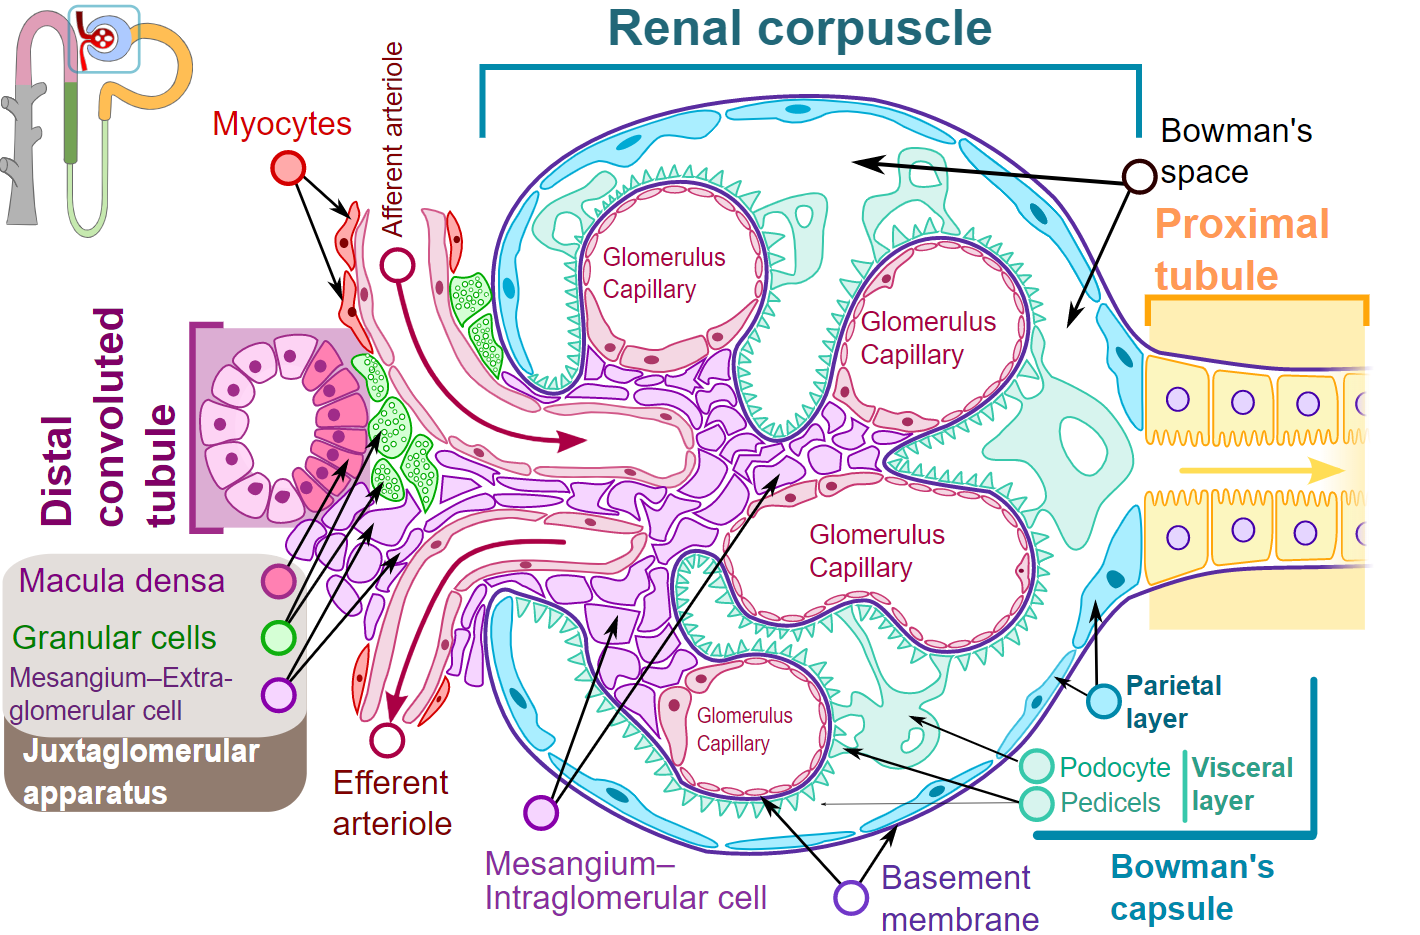 Diagram of renal corpuscle structure
Nephron Histology